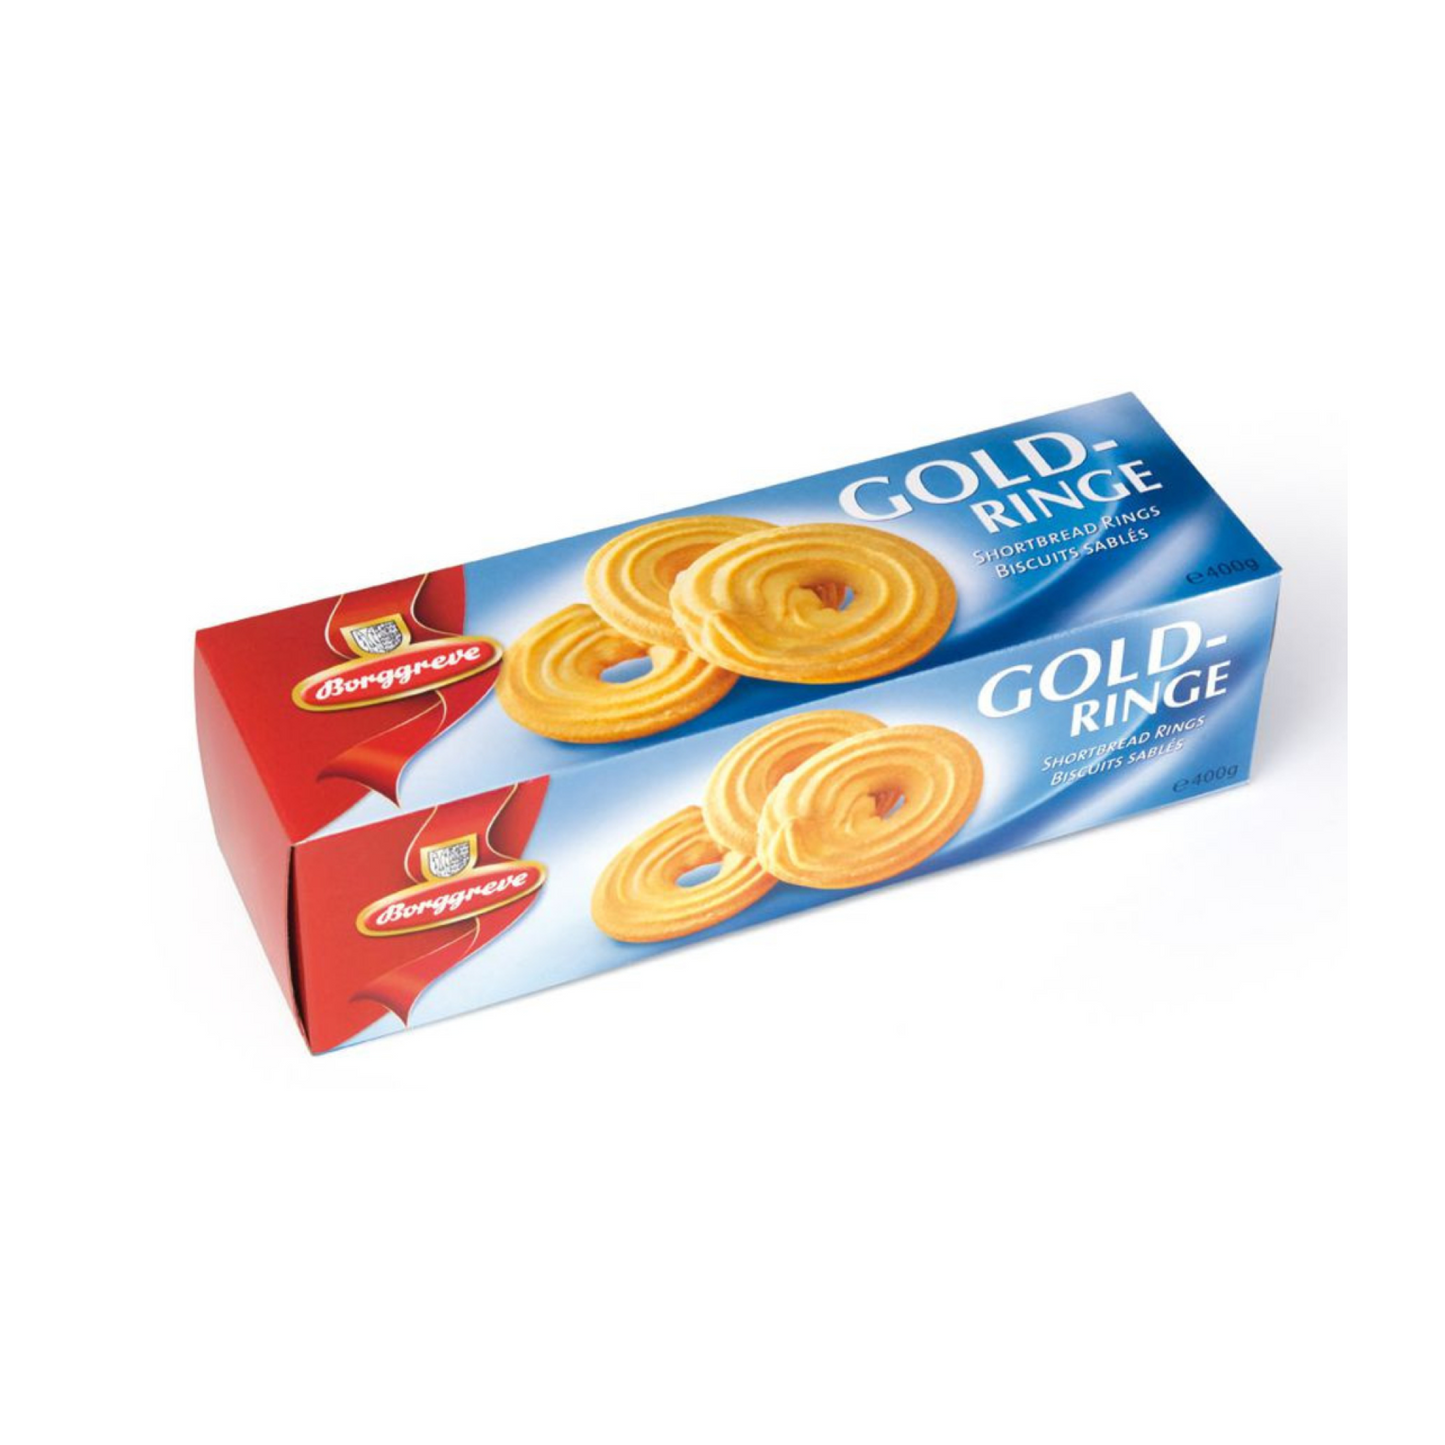 Borggreve Classic Golden Rings Biscuits 400g